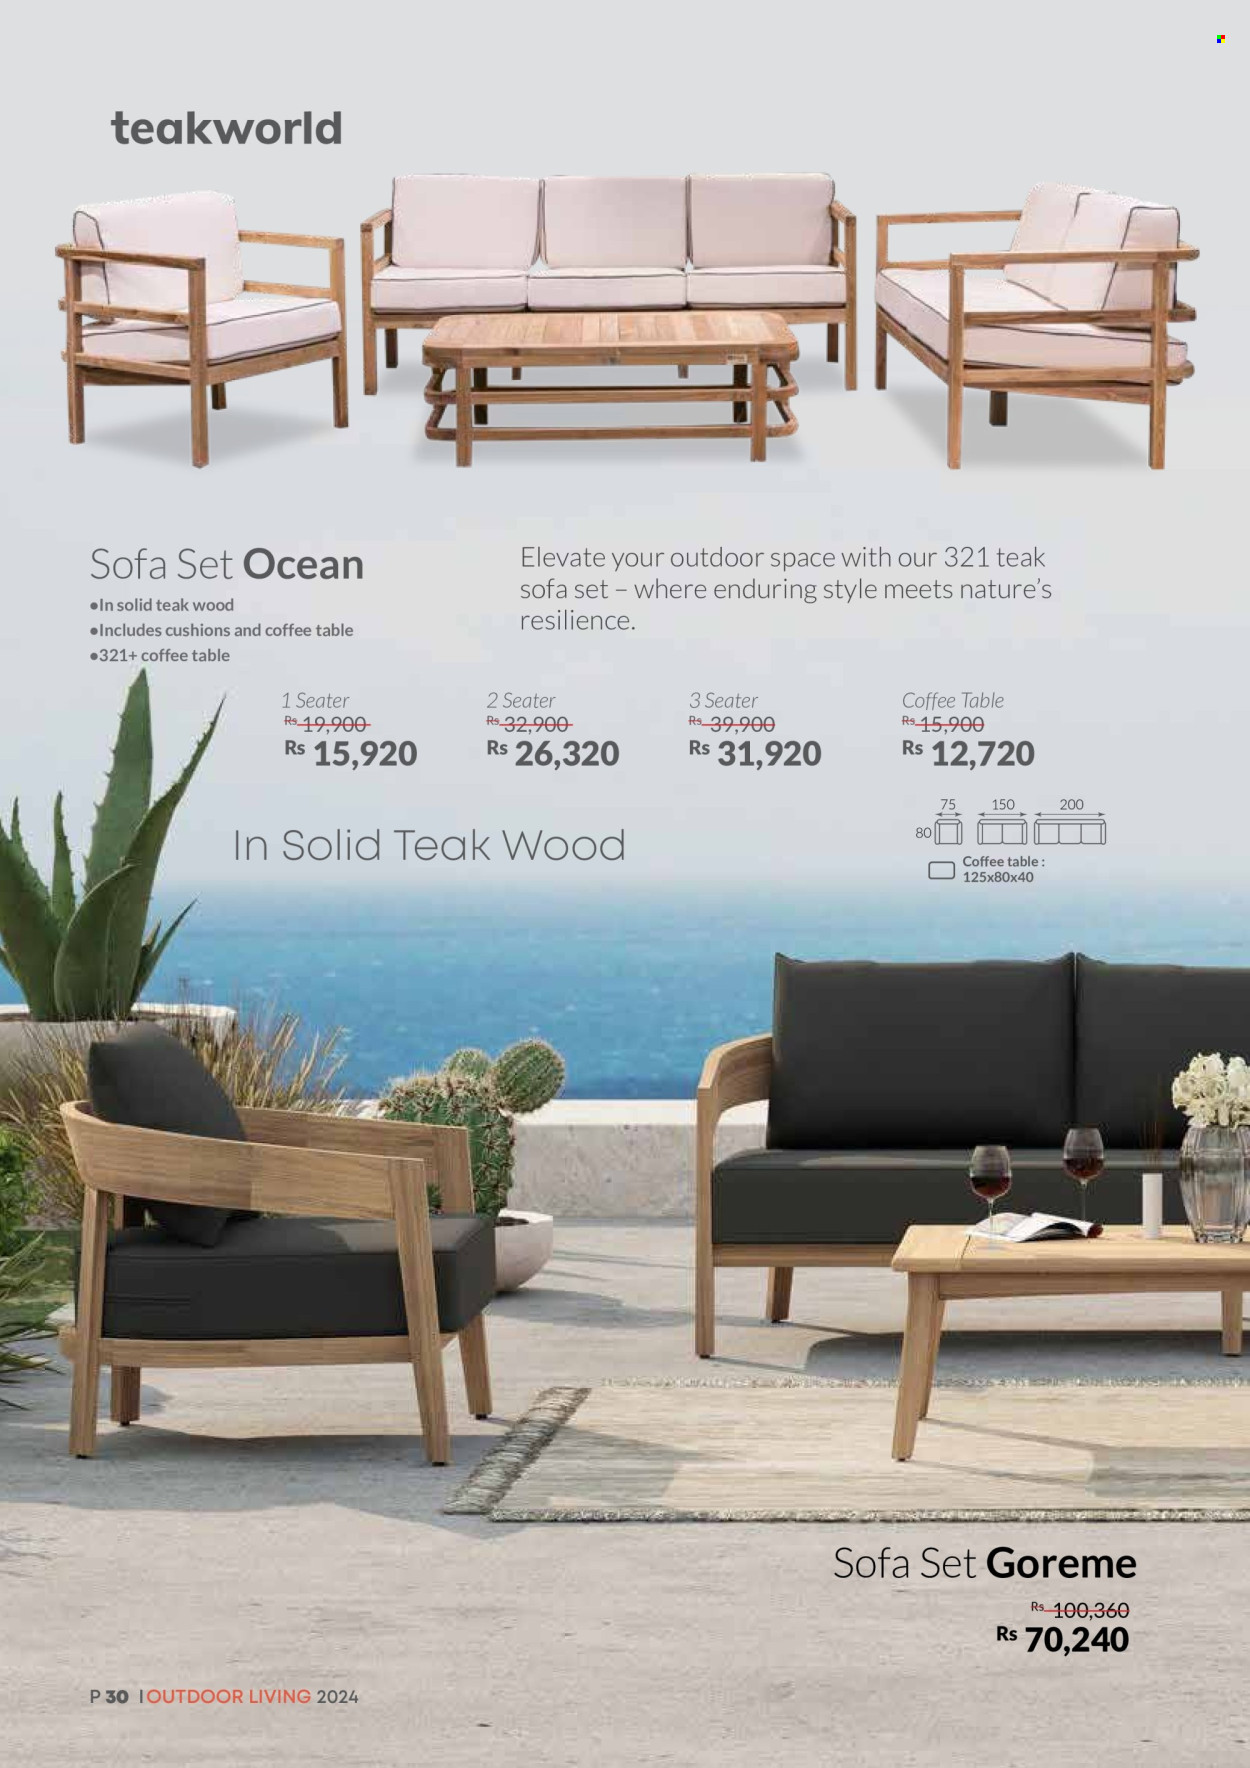 thumbnail - Teak World Catalogue - Sales products - table, sofa, seating set, coffee table, cushion. Page 30.